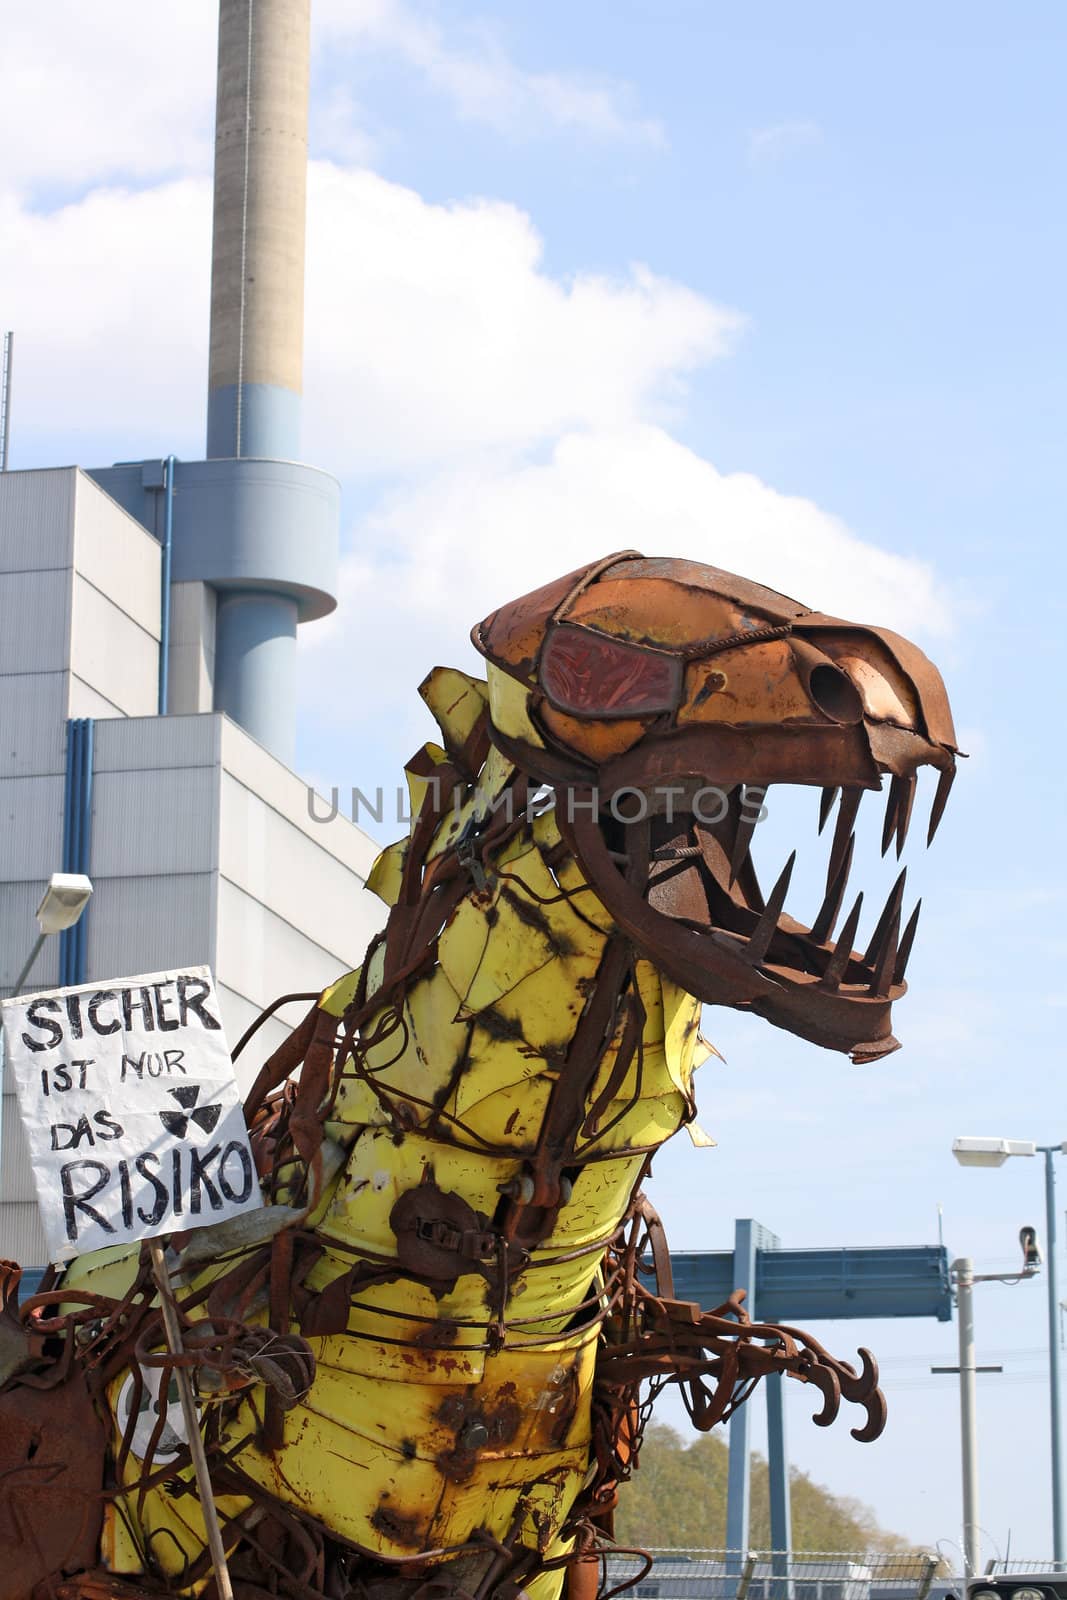 Anti-nuclear power protest at Krümmel Nuclear Power Station in Geesthacht, near Hamburg, Germany. 24th April 2010. German text on rusty monster says "Only the risk is guaranteed."